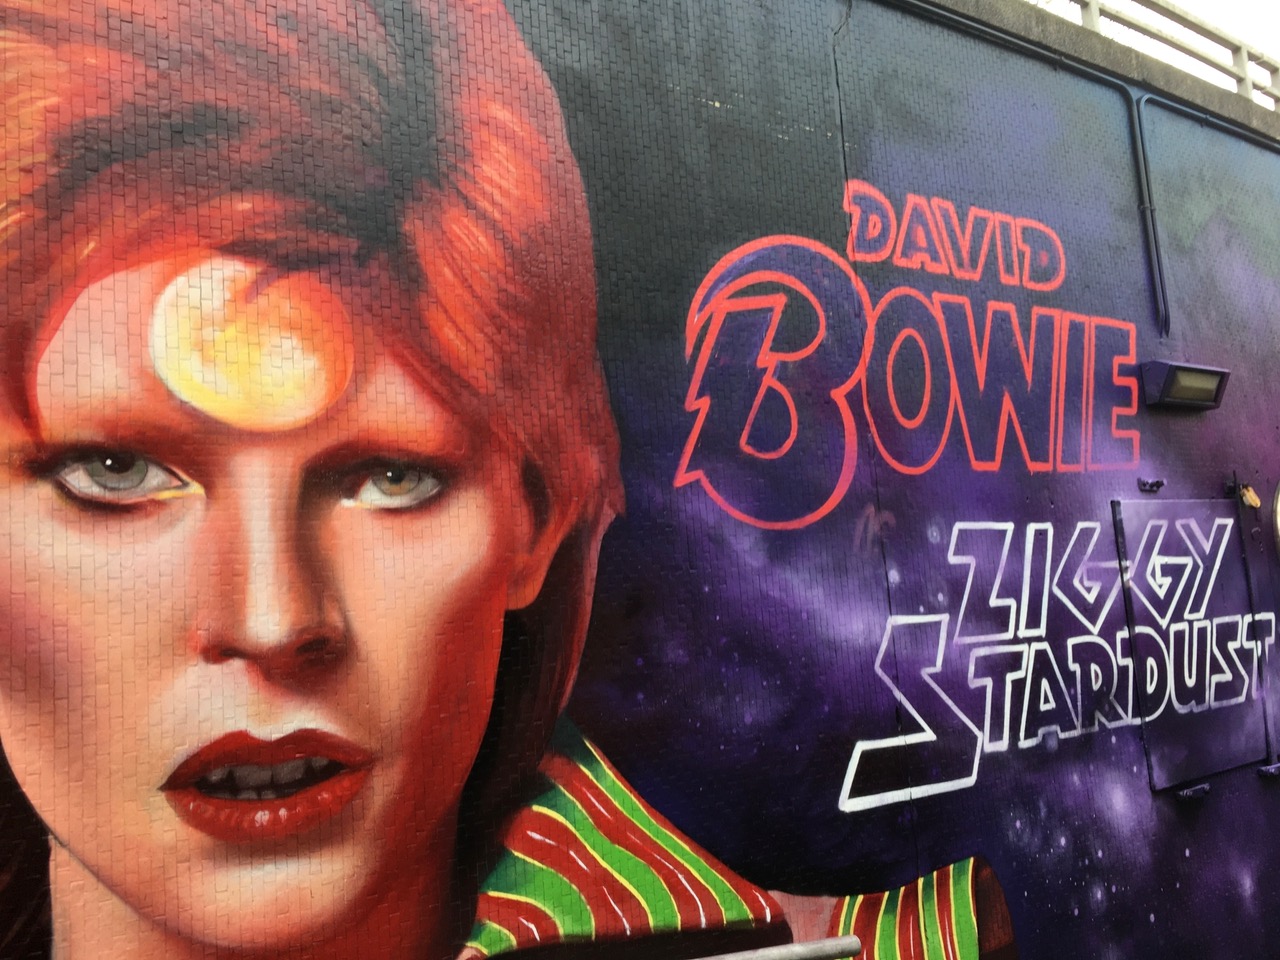 Image of David Bowie on a Muriel in Kingston